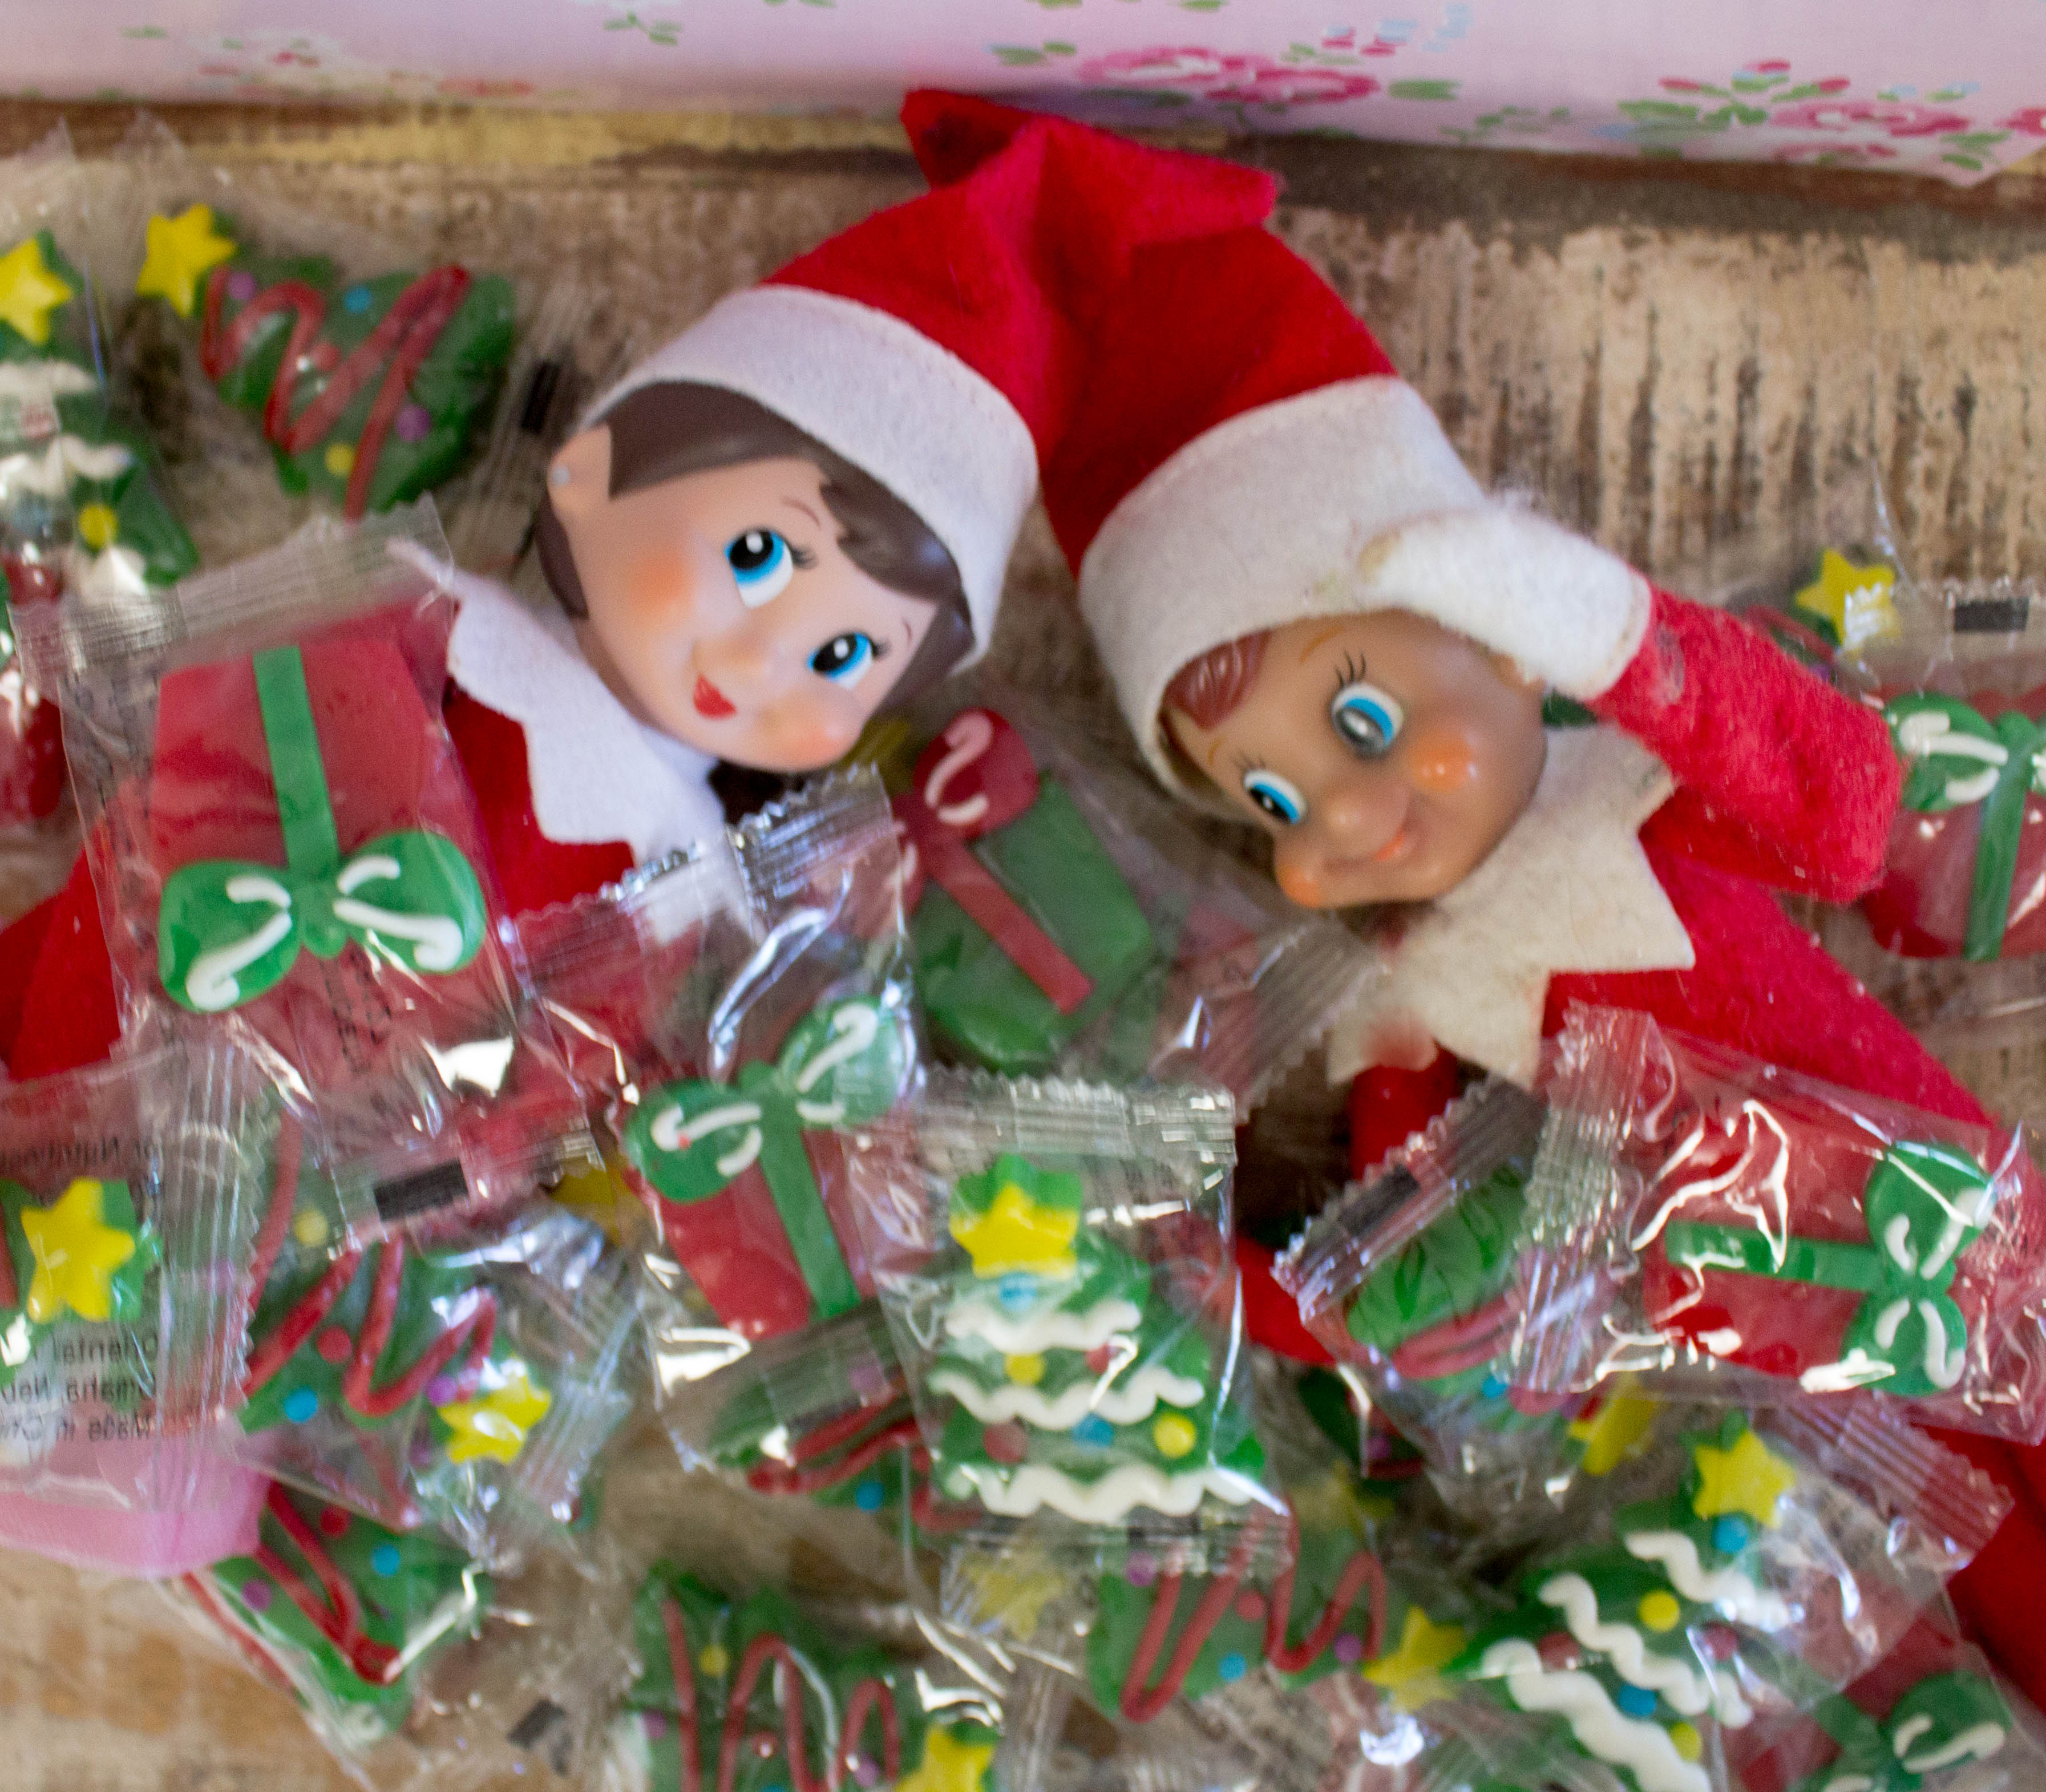 elf-on-the-shelf-ideas-and-elf-on-shelf-products-scenes-christmas-traditions-13